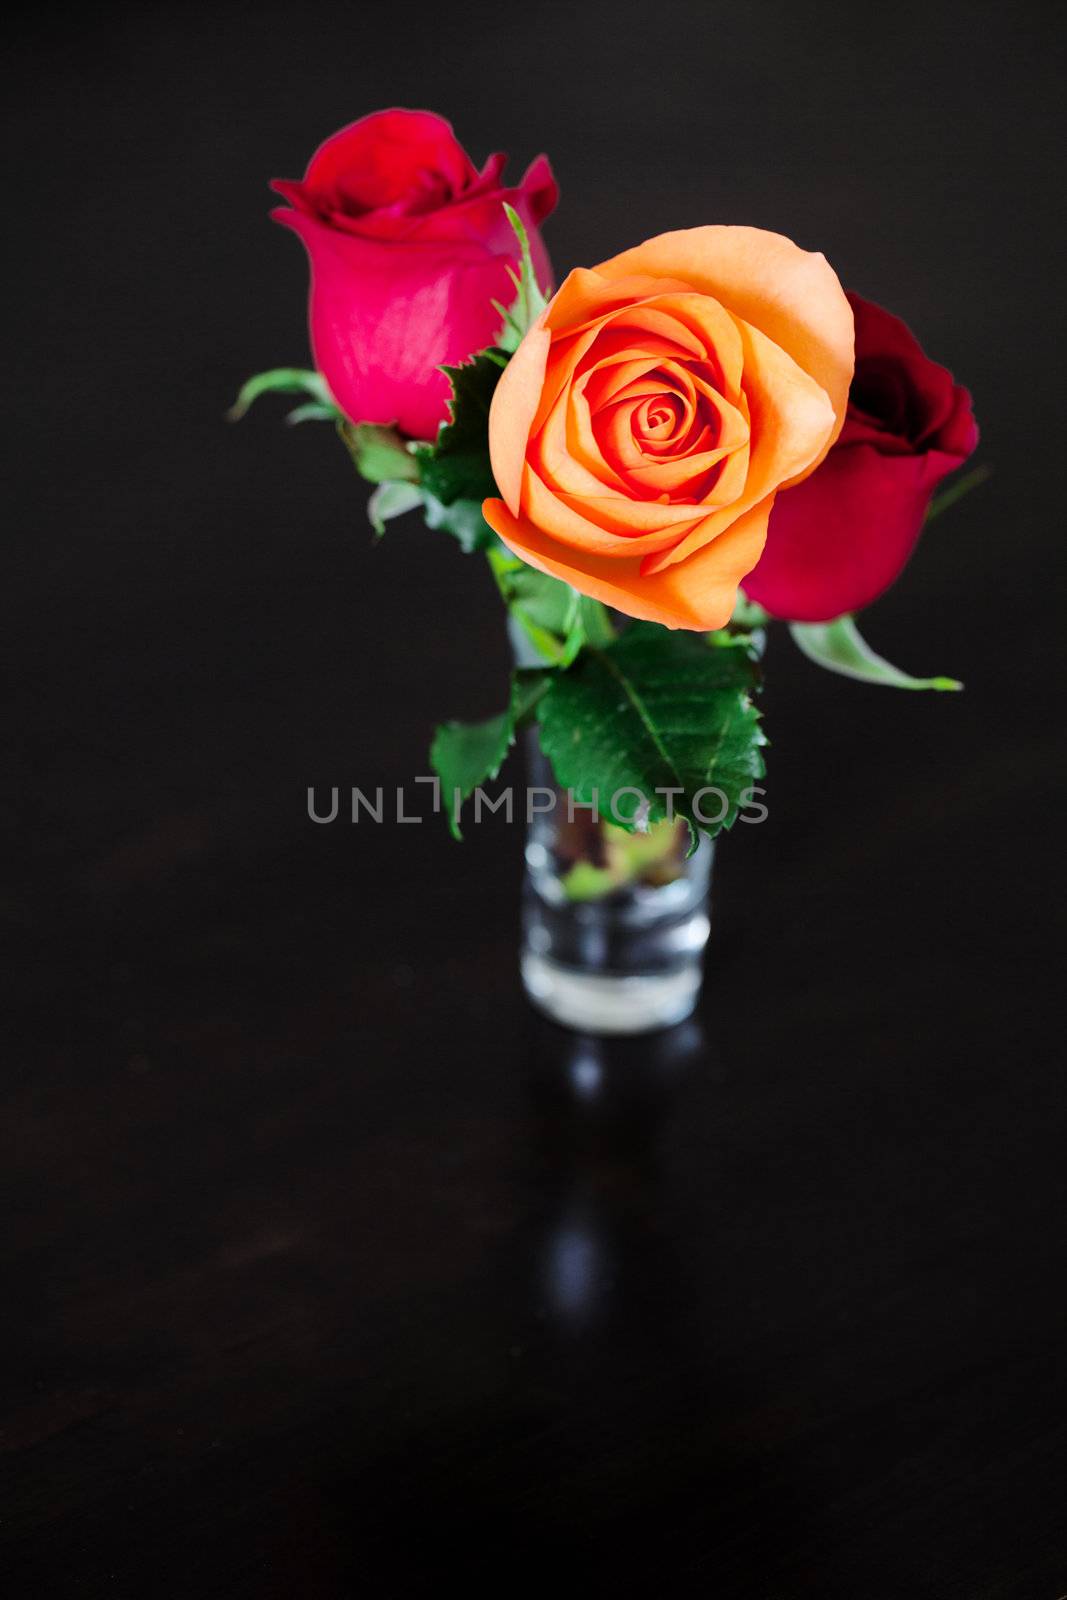 bouquet of colorful roses in a vase on a wooden table